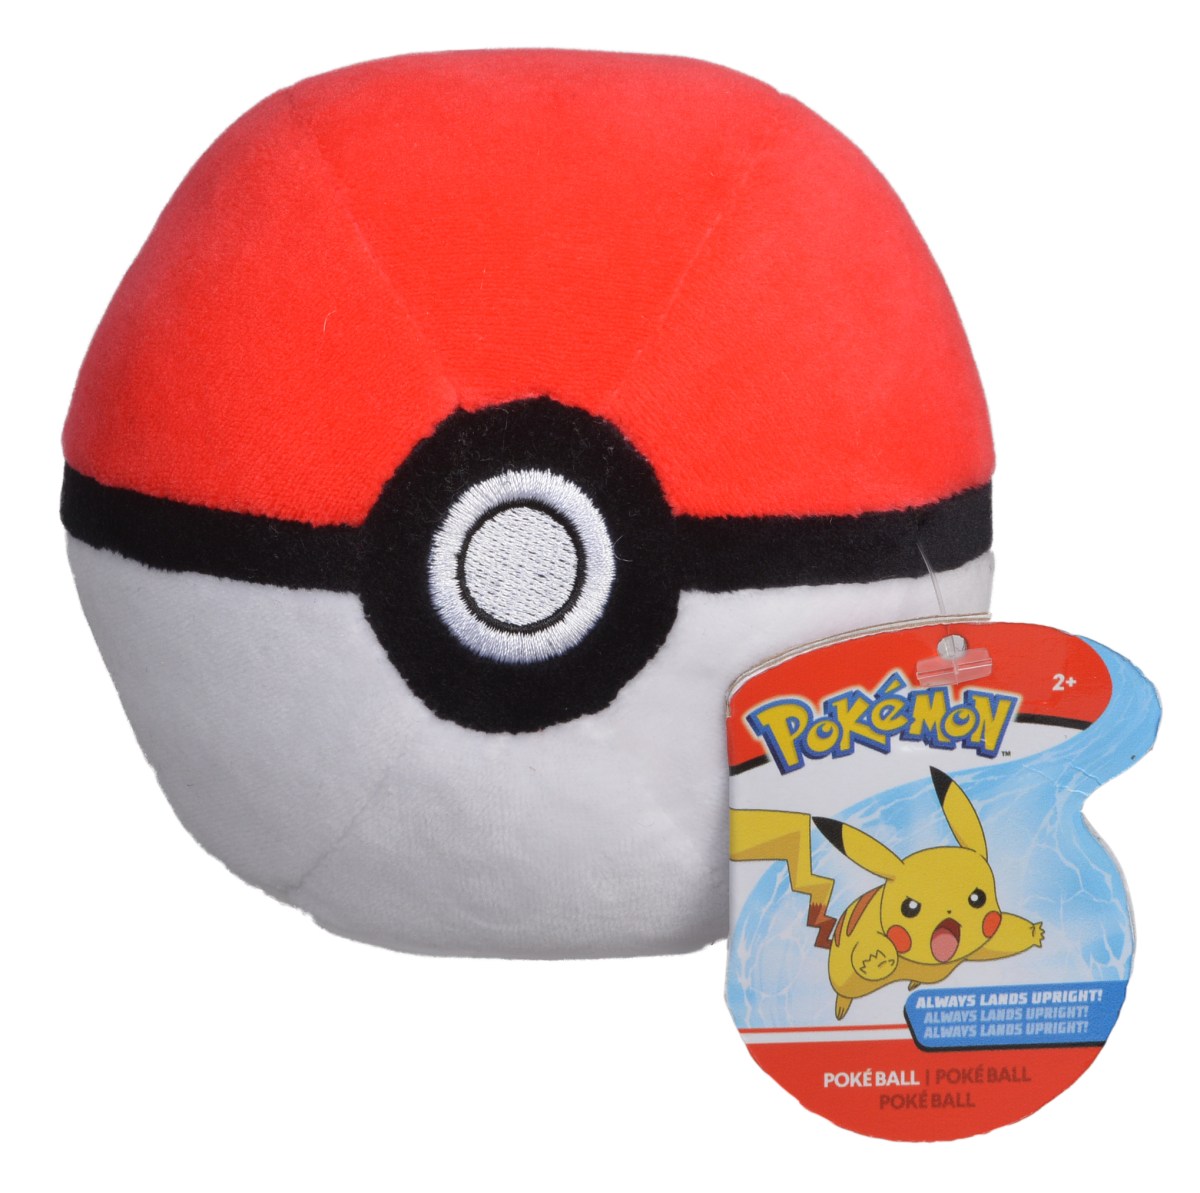 Picture of a plush pokeball